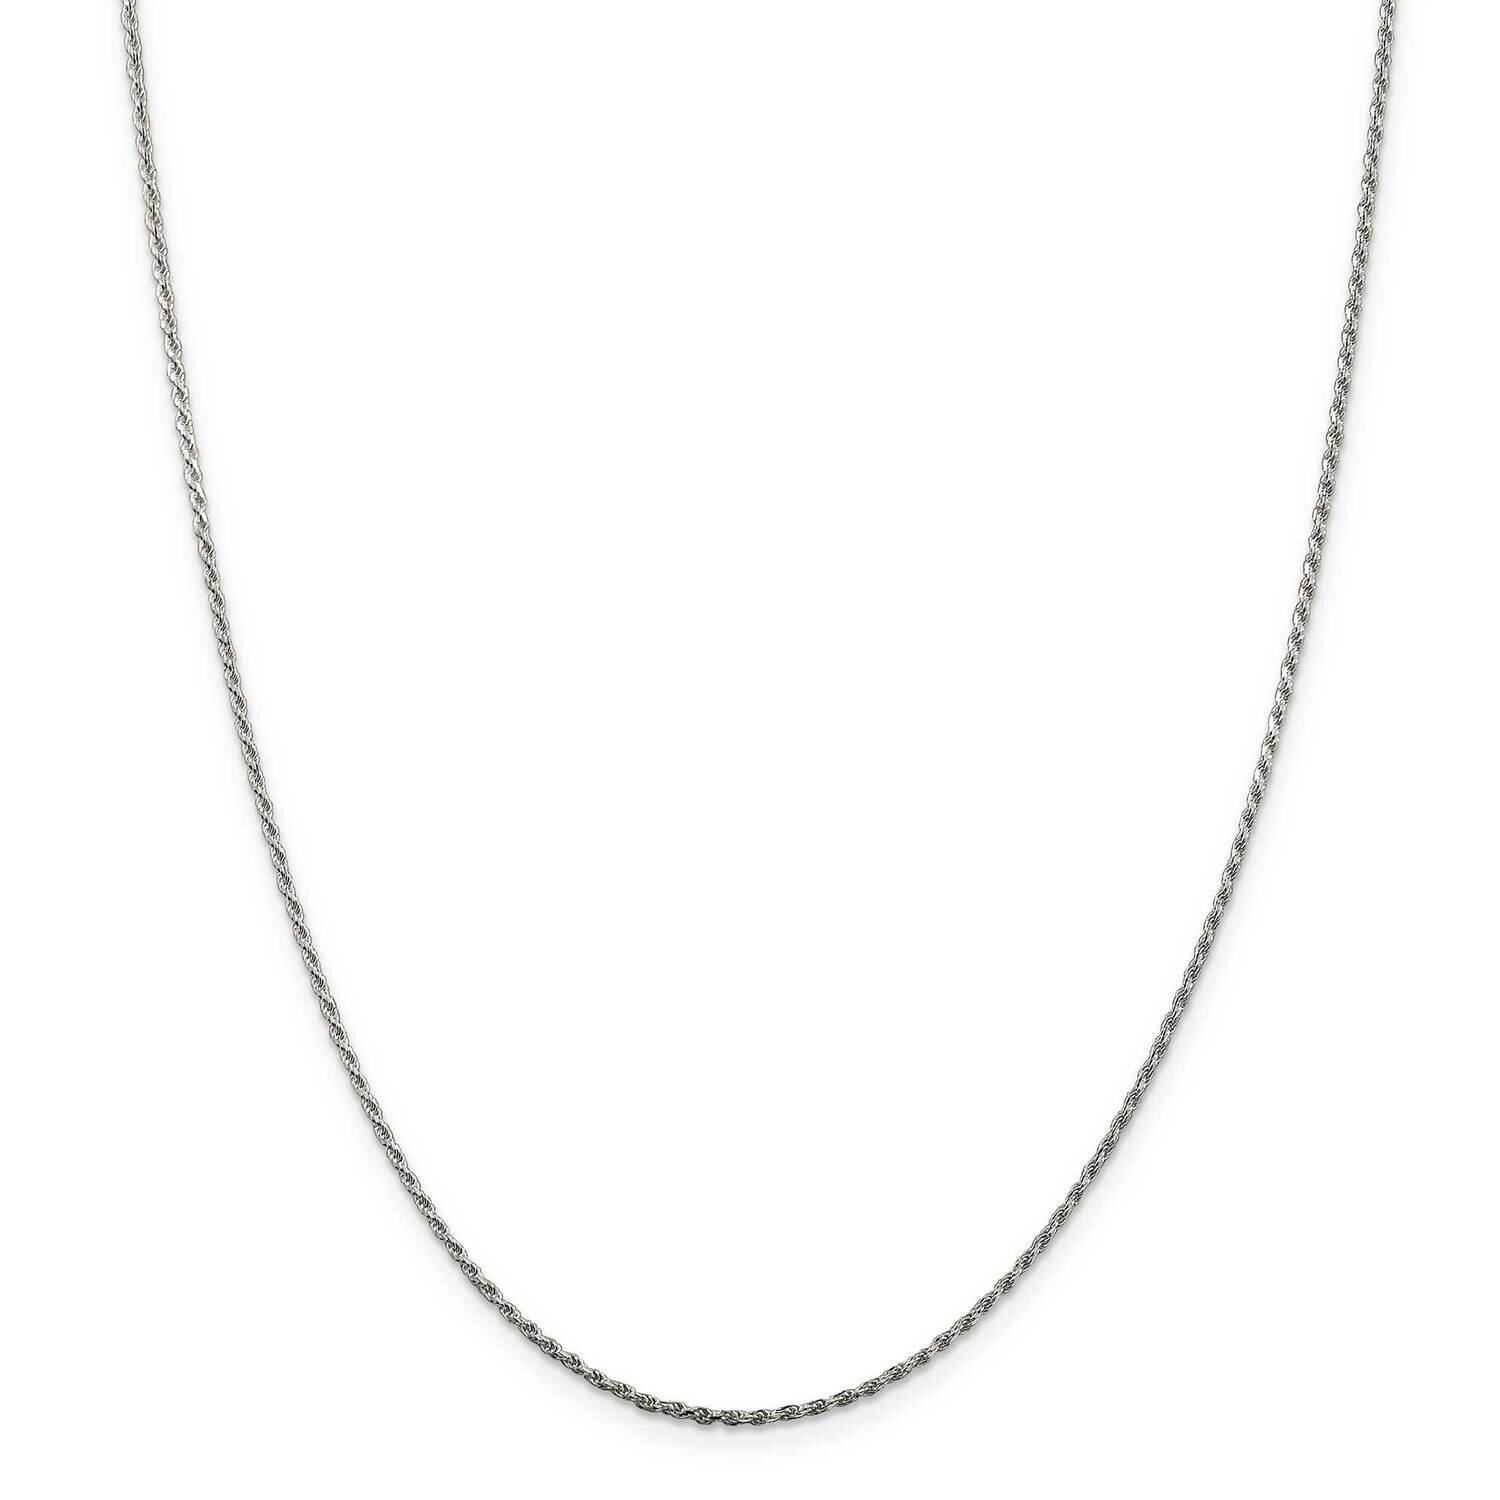 1.5mm Diamond-Cut Rope Chain with 4 Inch Extender 22 Inch Sterling Silver Rhodium-Plated QDC020RH-22